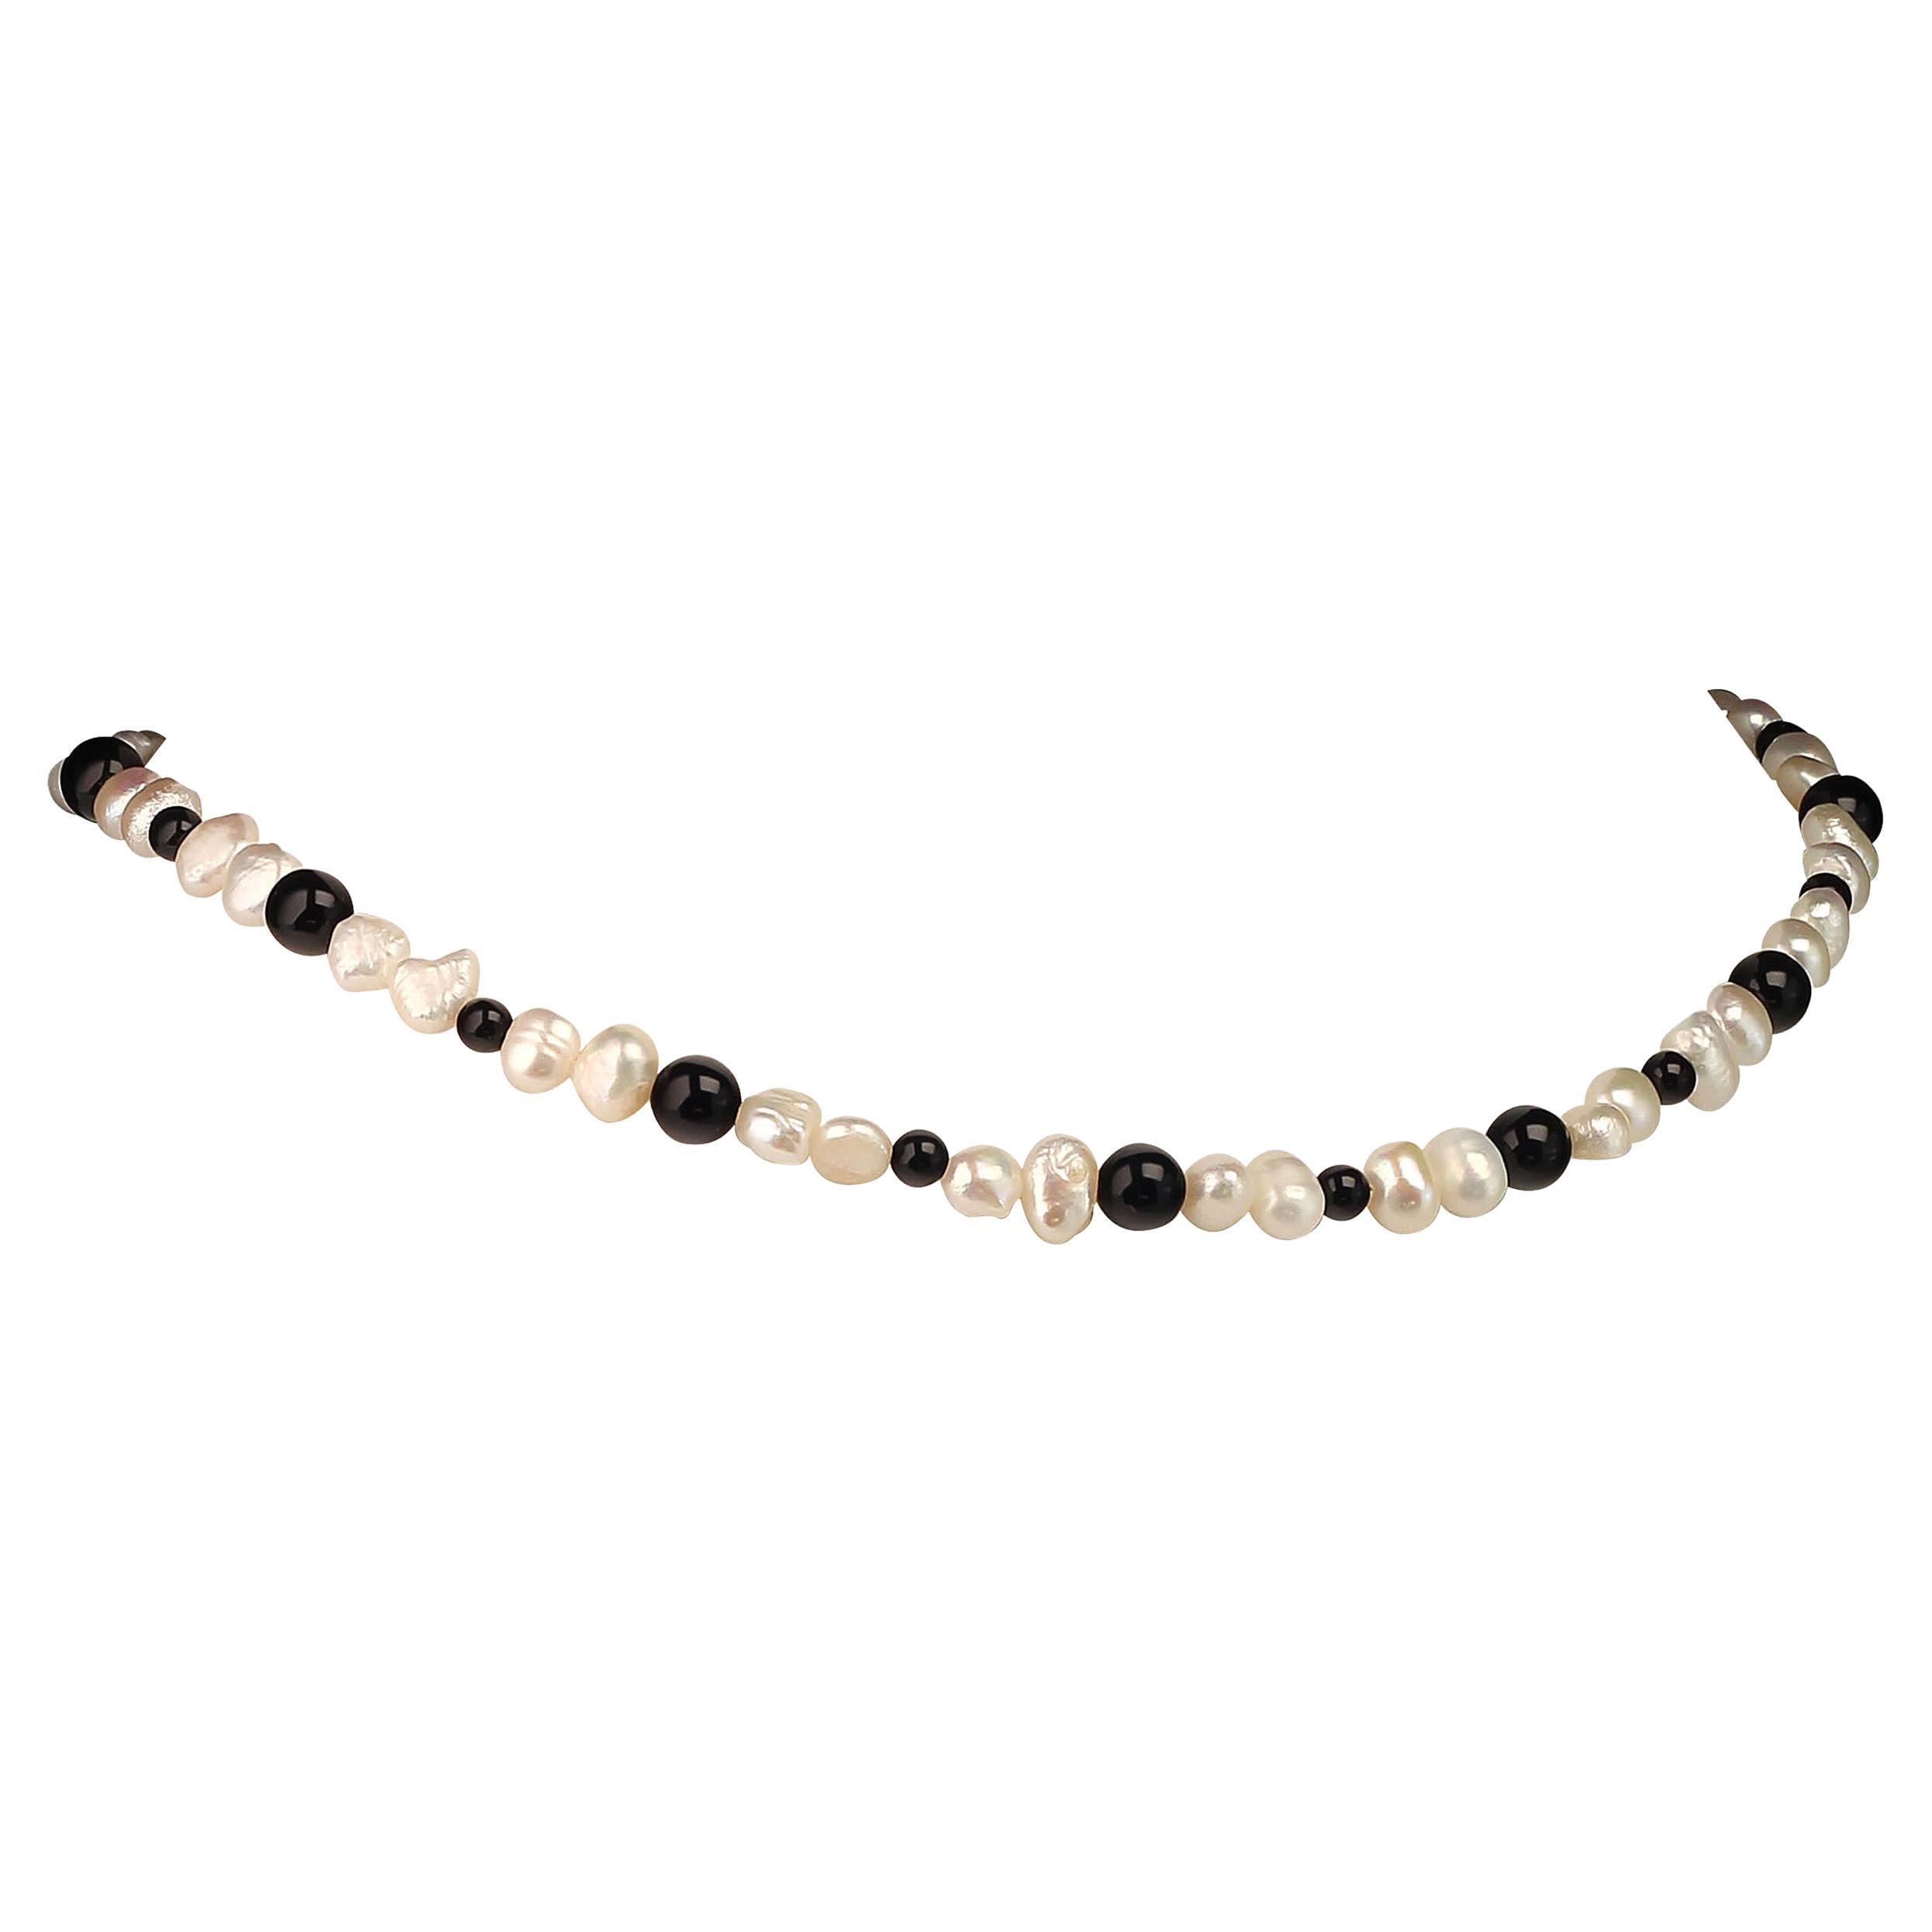 AJD White Pearl and Black Onyx Choker Necklace or Bracelet June Birthstone